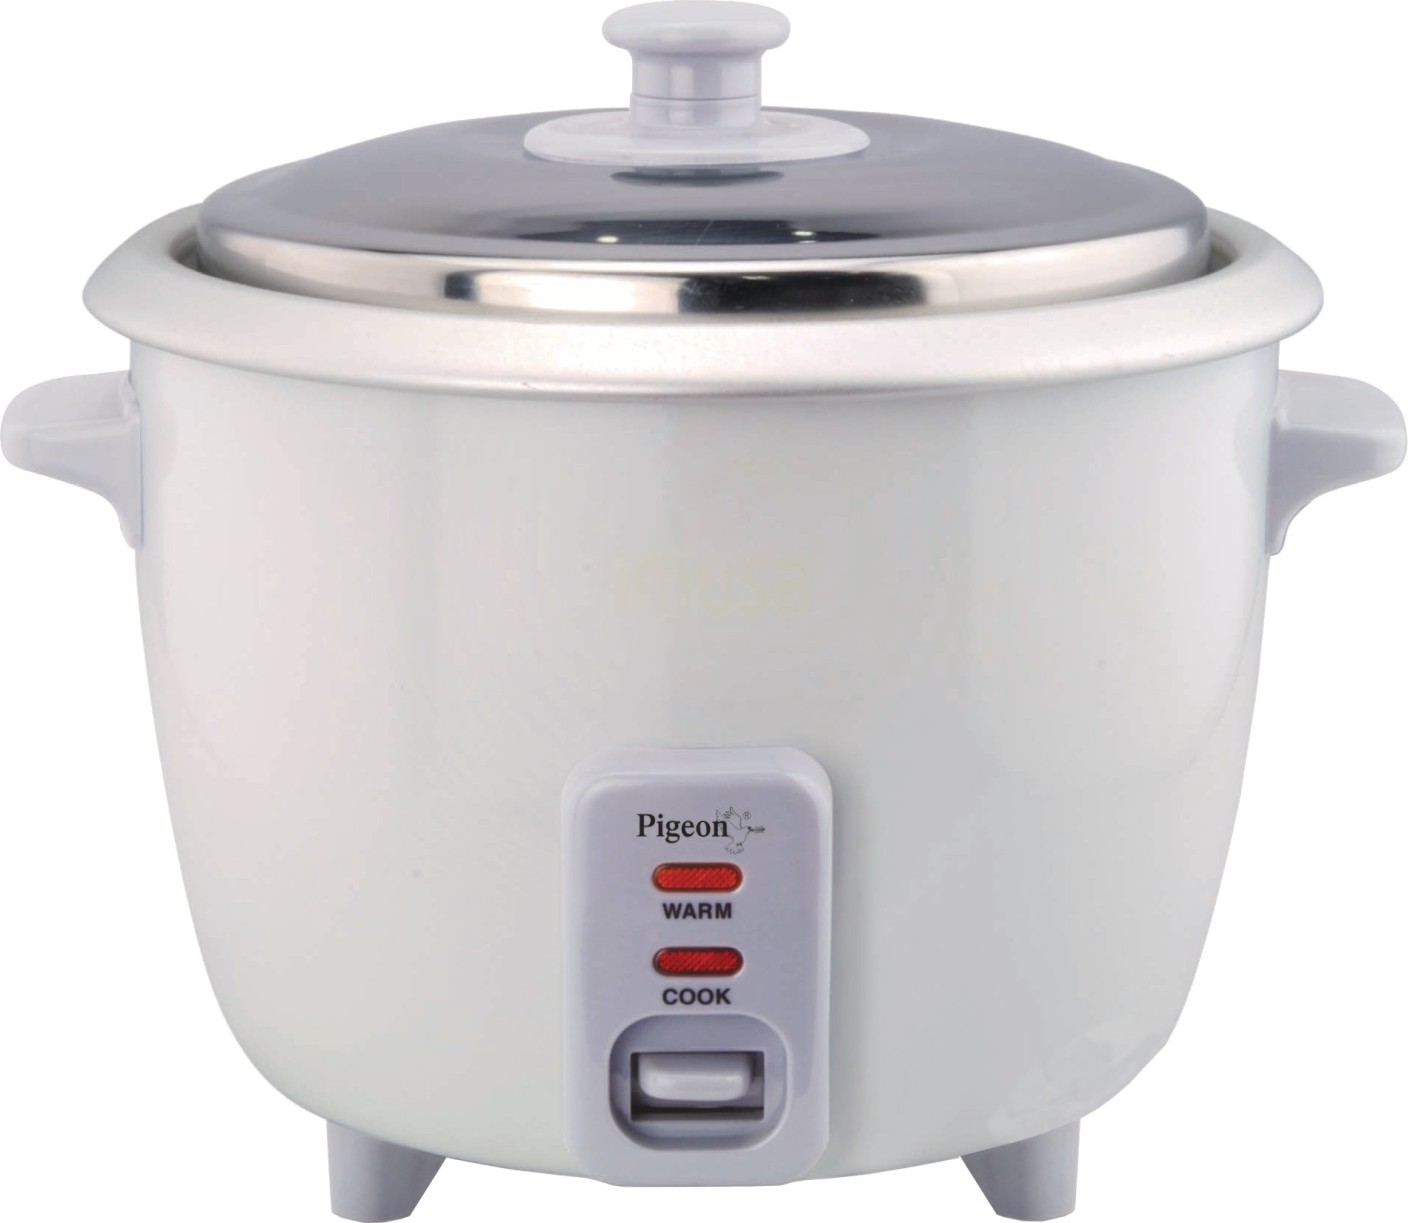 Pigeon Favourite Electric Rice Cooker with Steaming Feature Price in ...